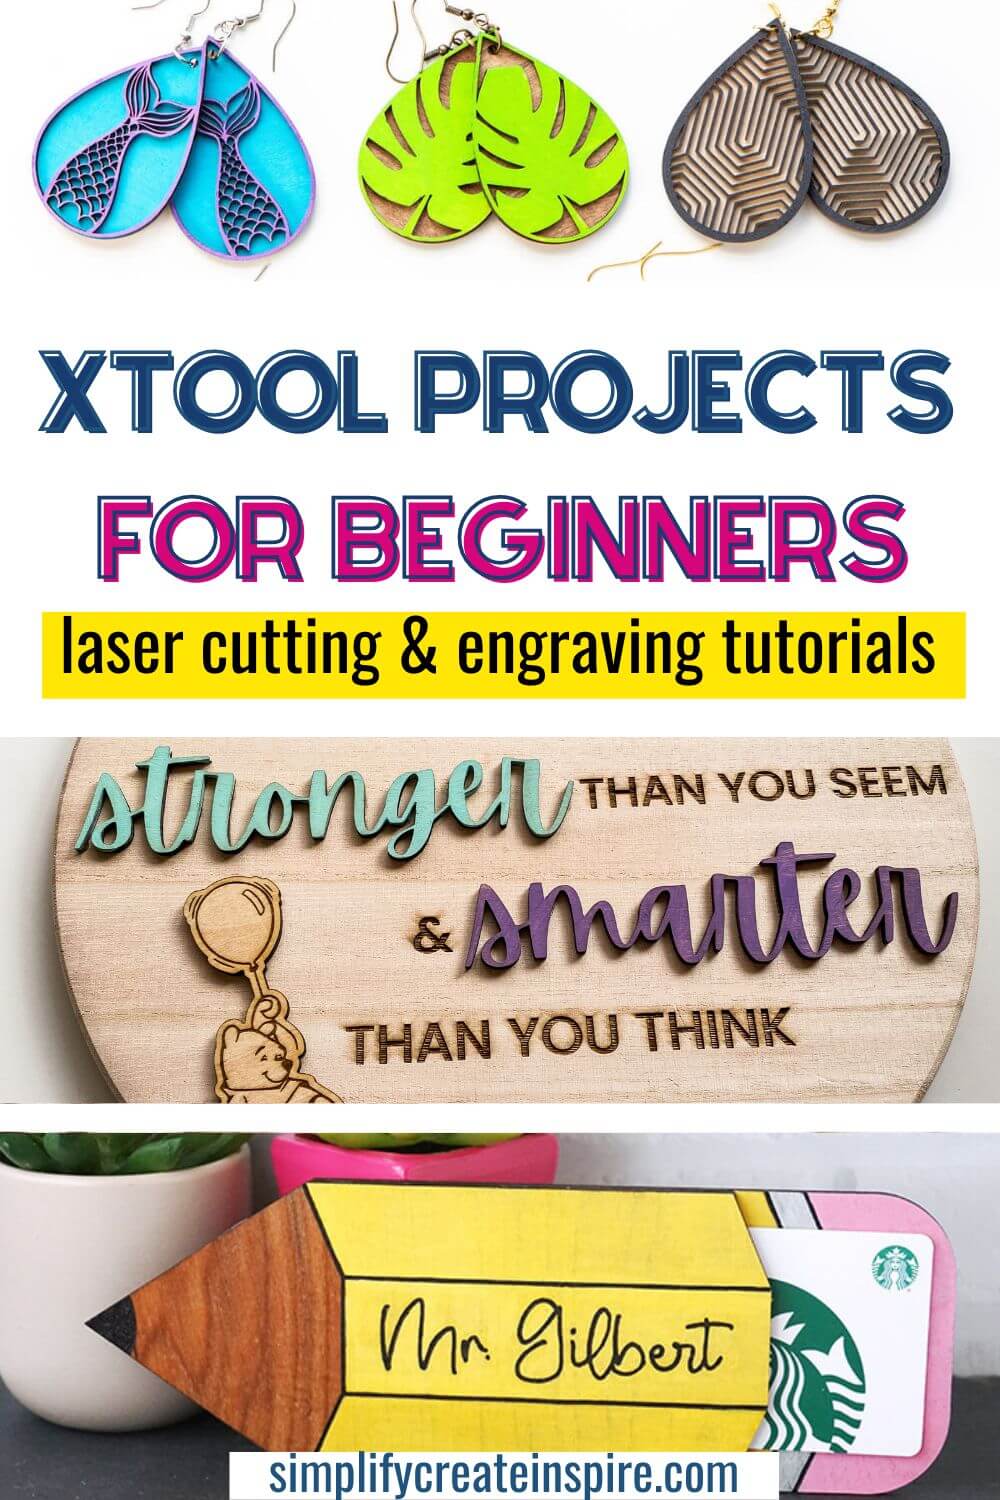 Xtool projects for beginners laser cutting and engraving tutorials